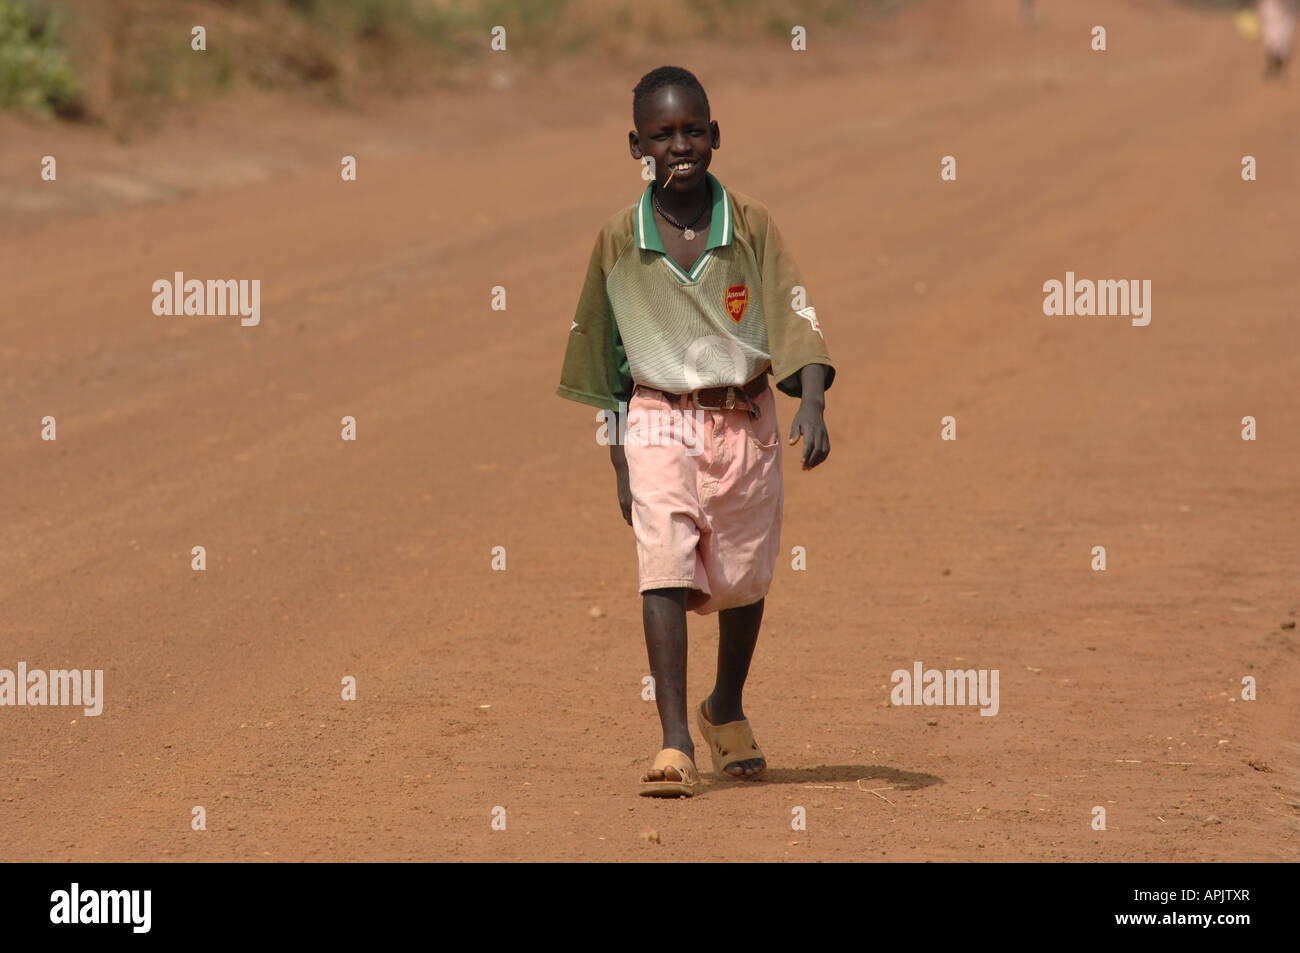 African child in Manchester United kit on a dirt road in Sudan Stock Photo